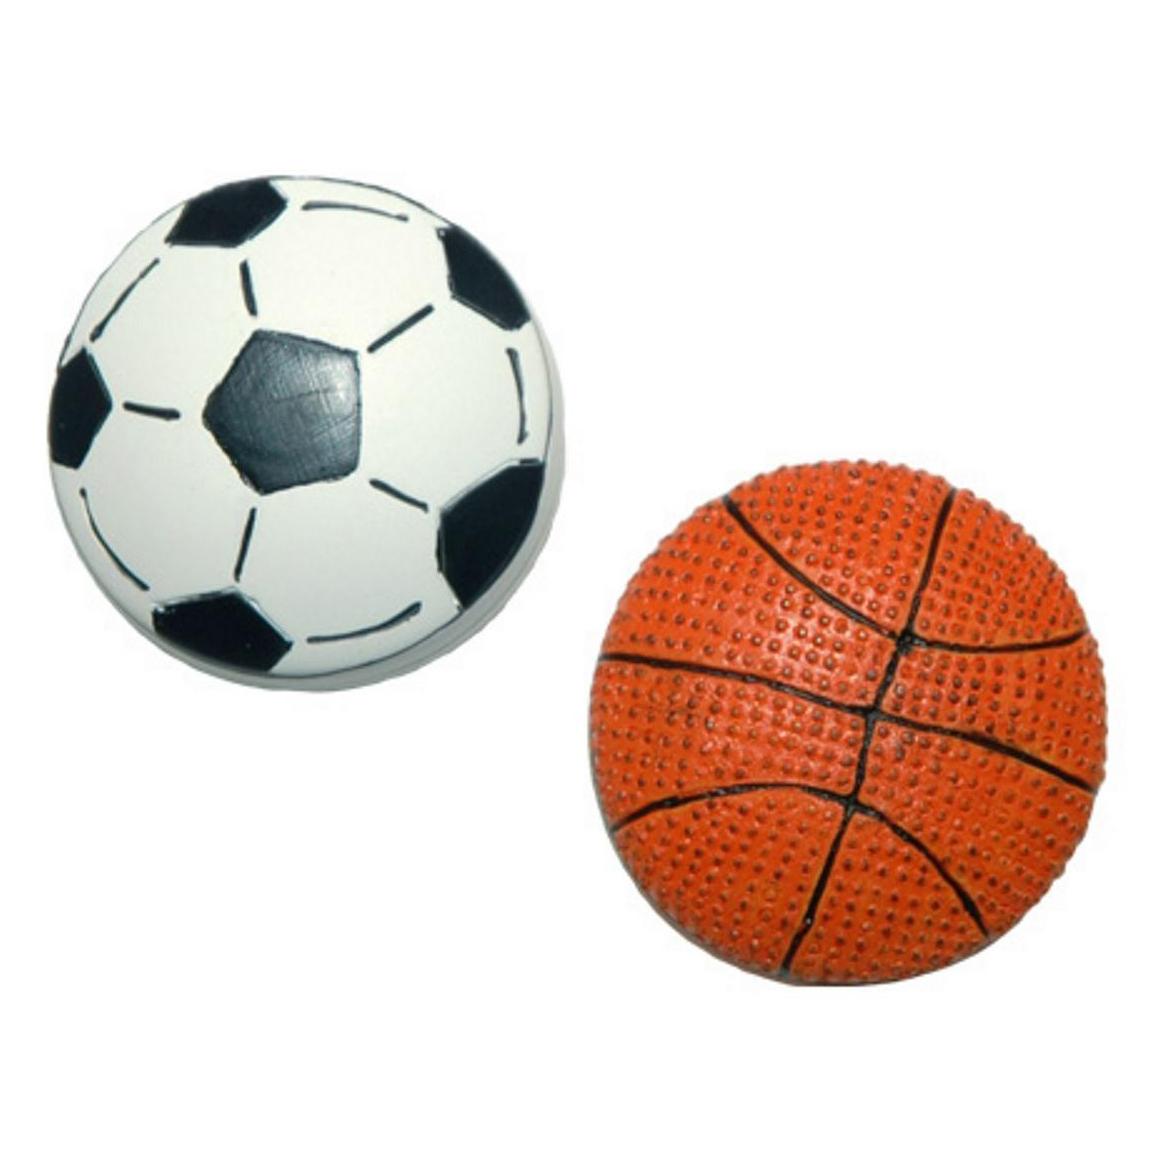 For The Little Sports Fanatic In Your Home